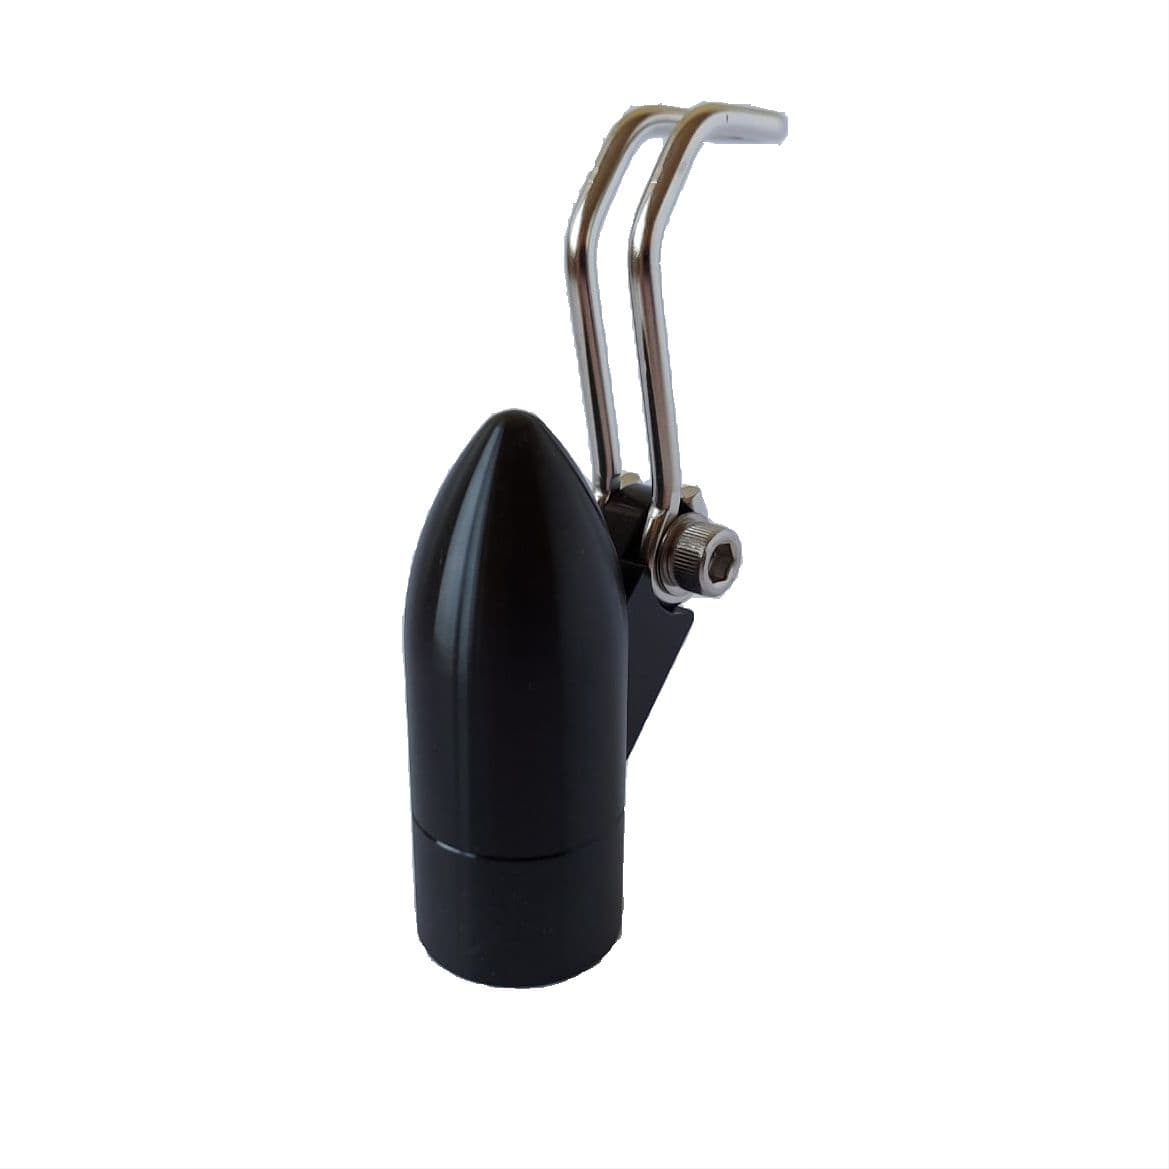 Black Rindow Bullet light with mounting hardware attached